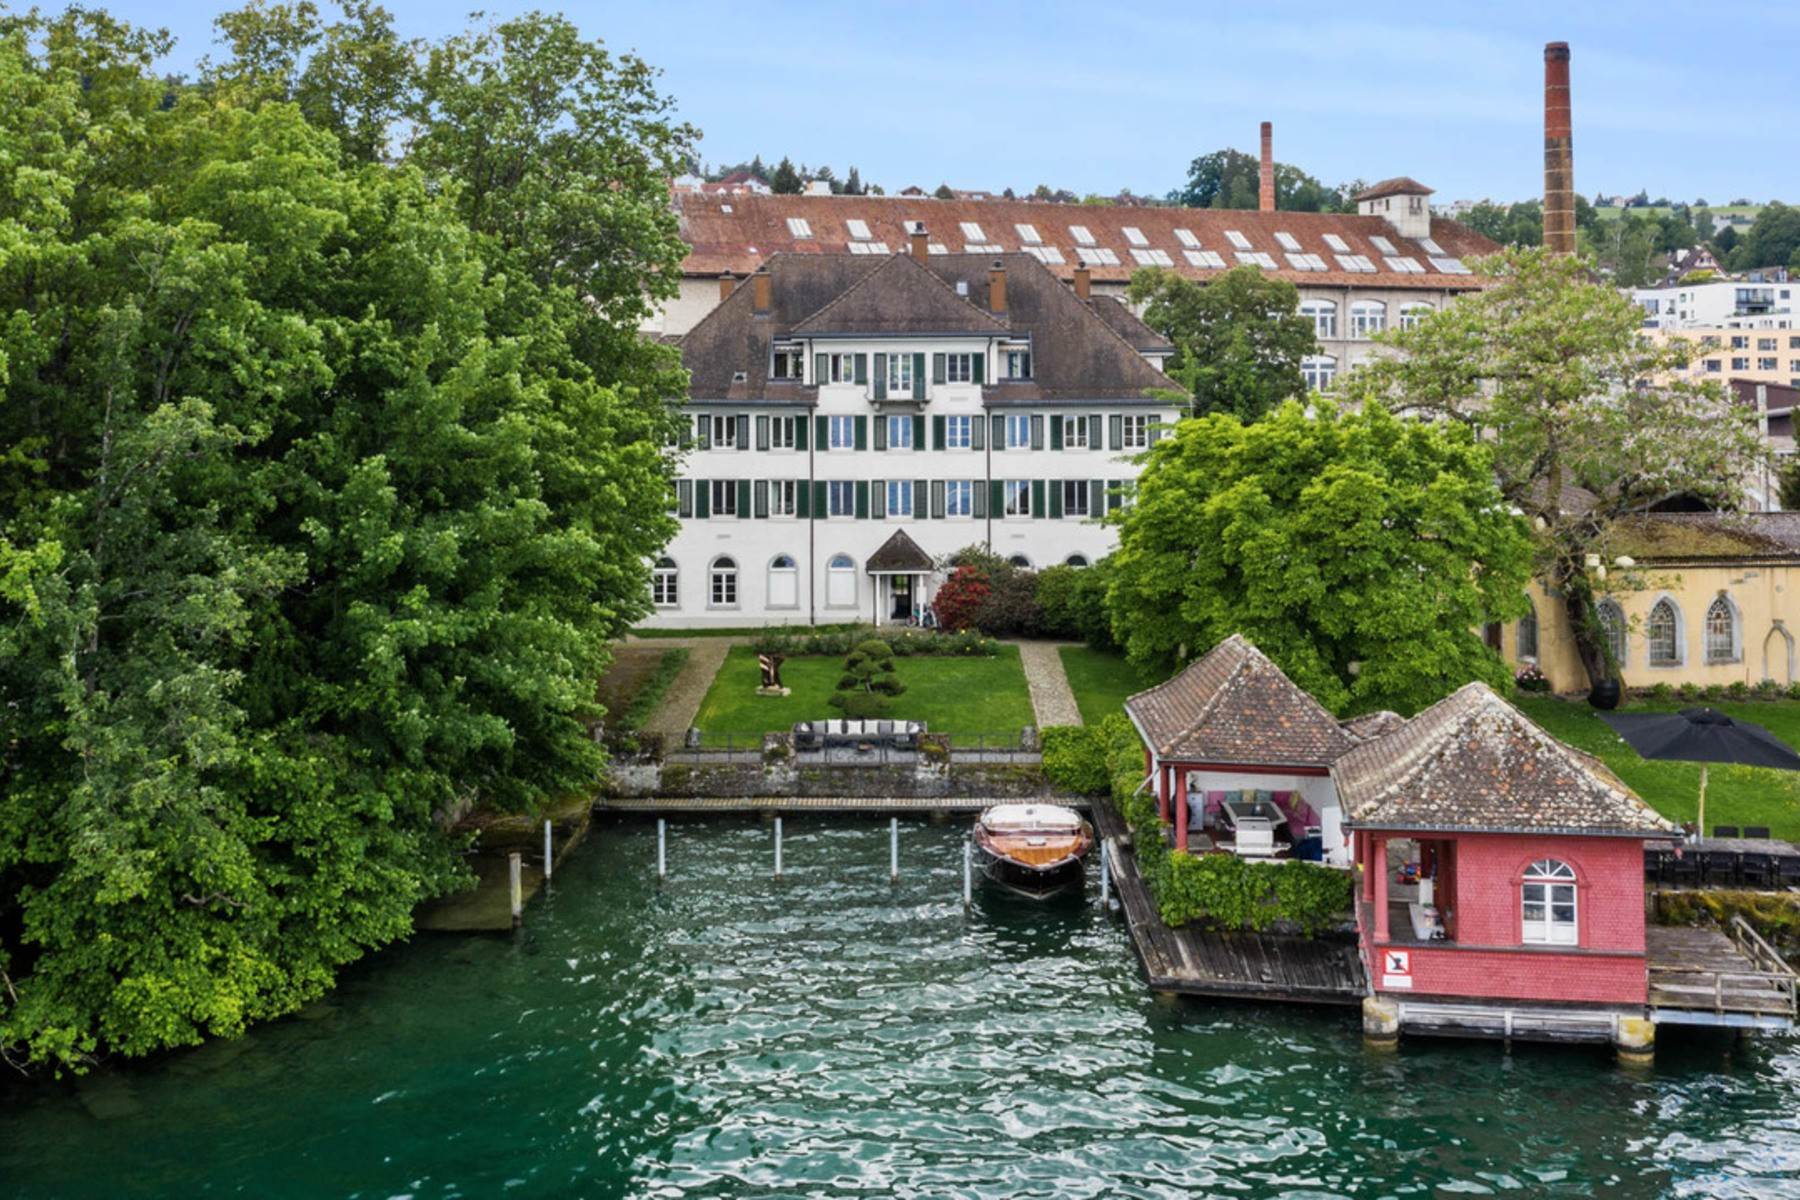 Single Family Homes for Sale at Historic villa with a private shore Wädenswil Wadenswil, Zurich 8820 Switzerland